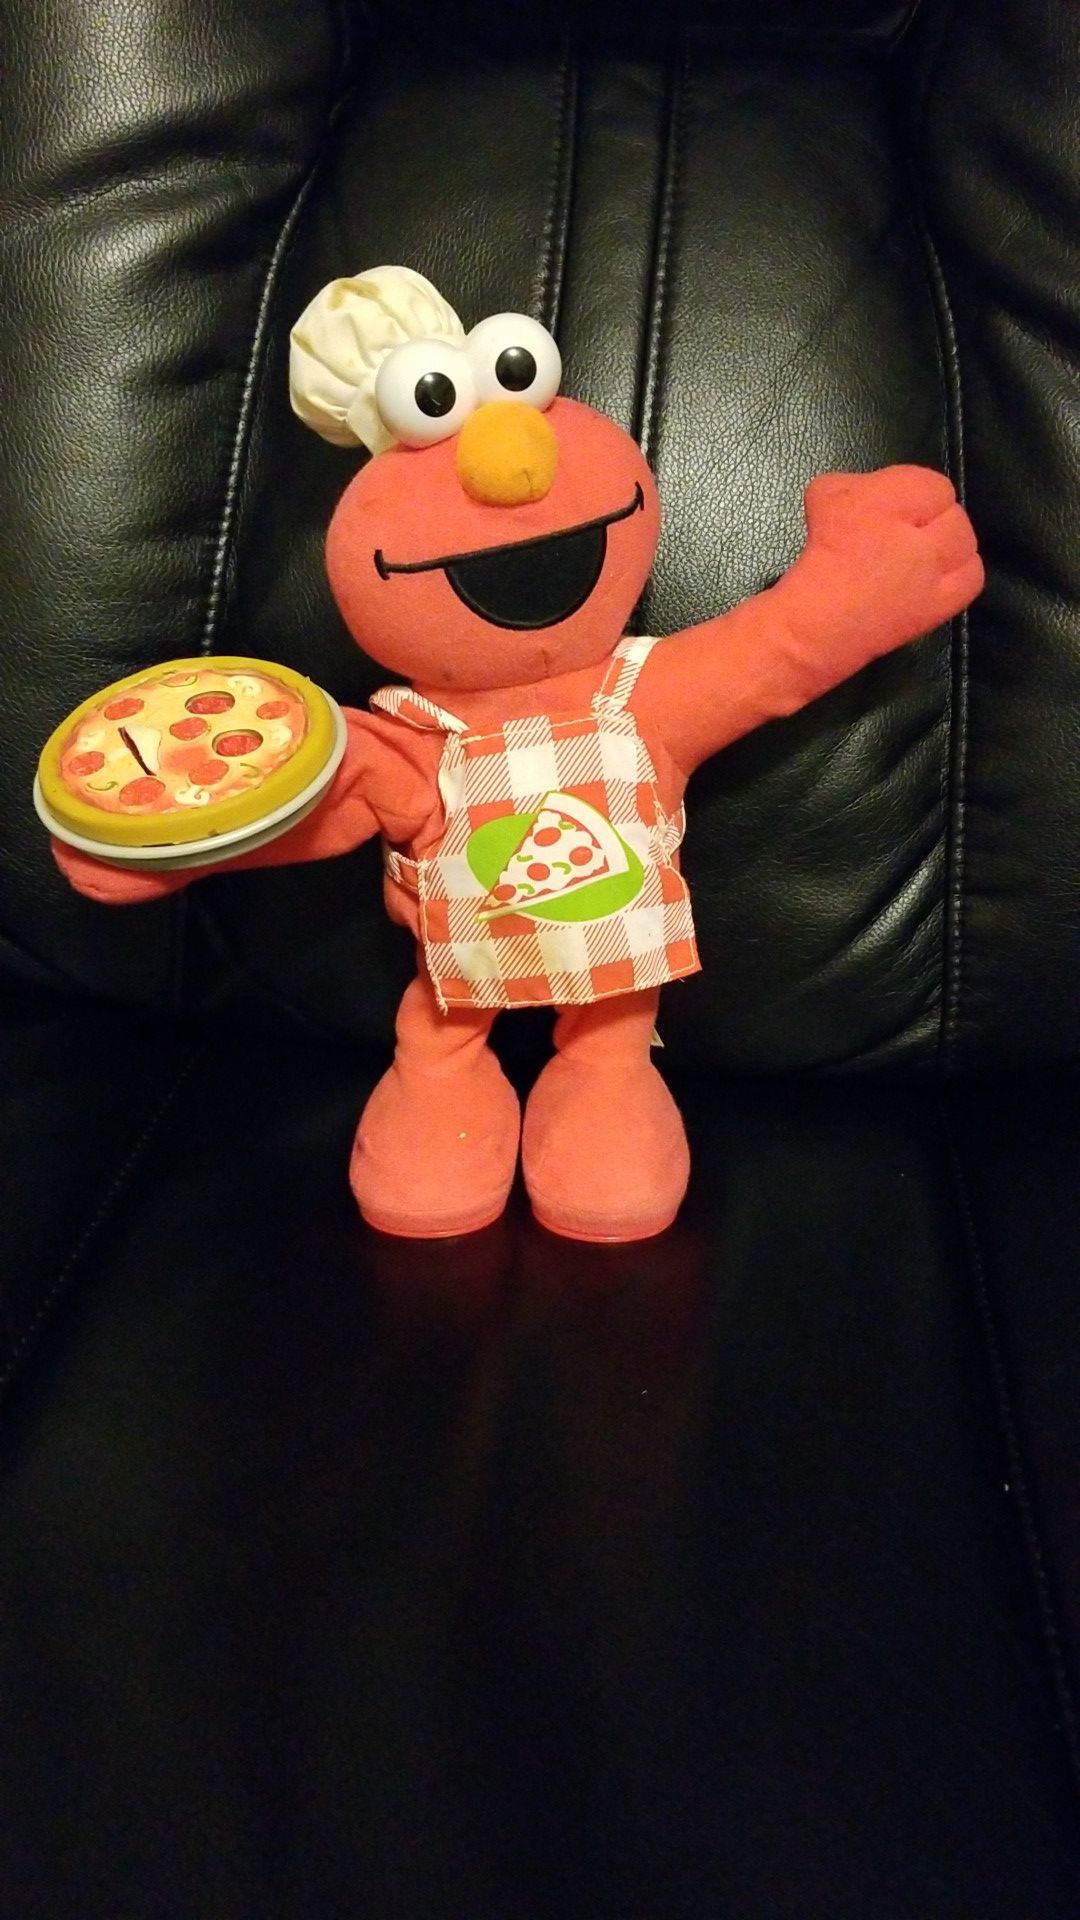 Collectable Elmo pizza toy